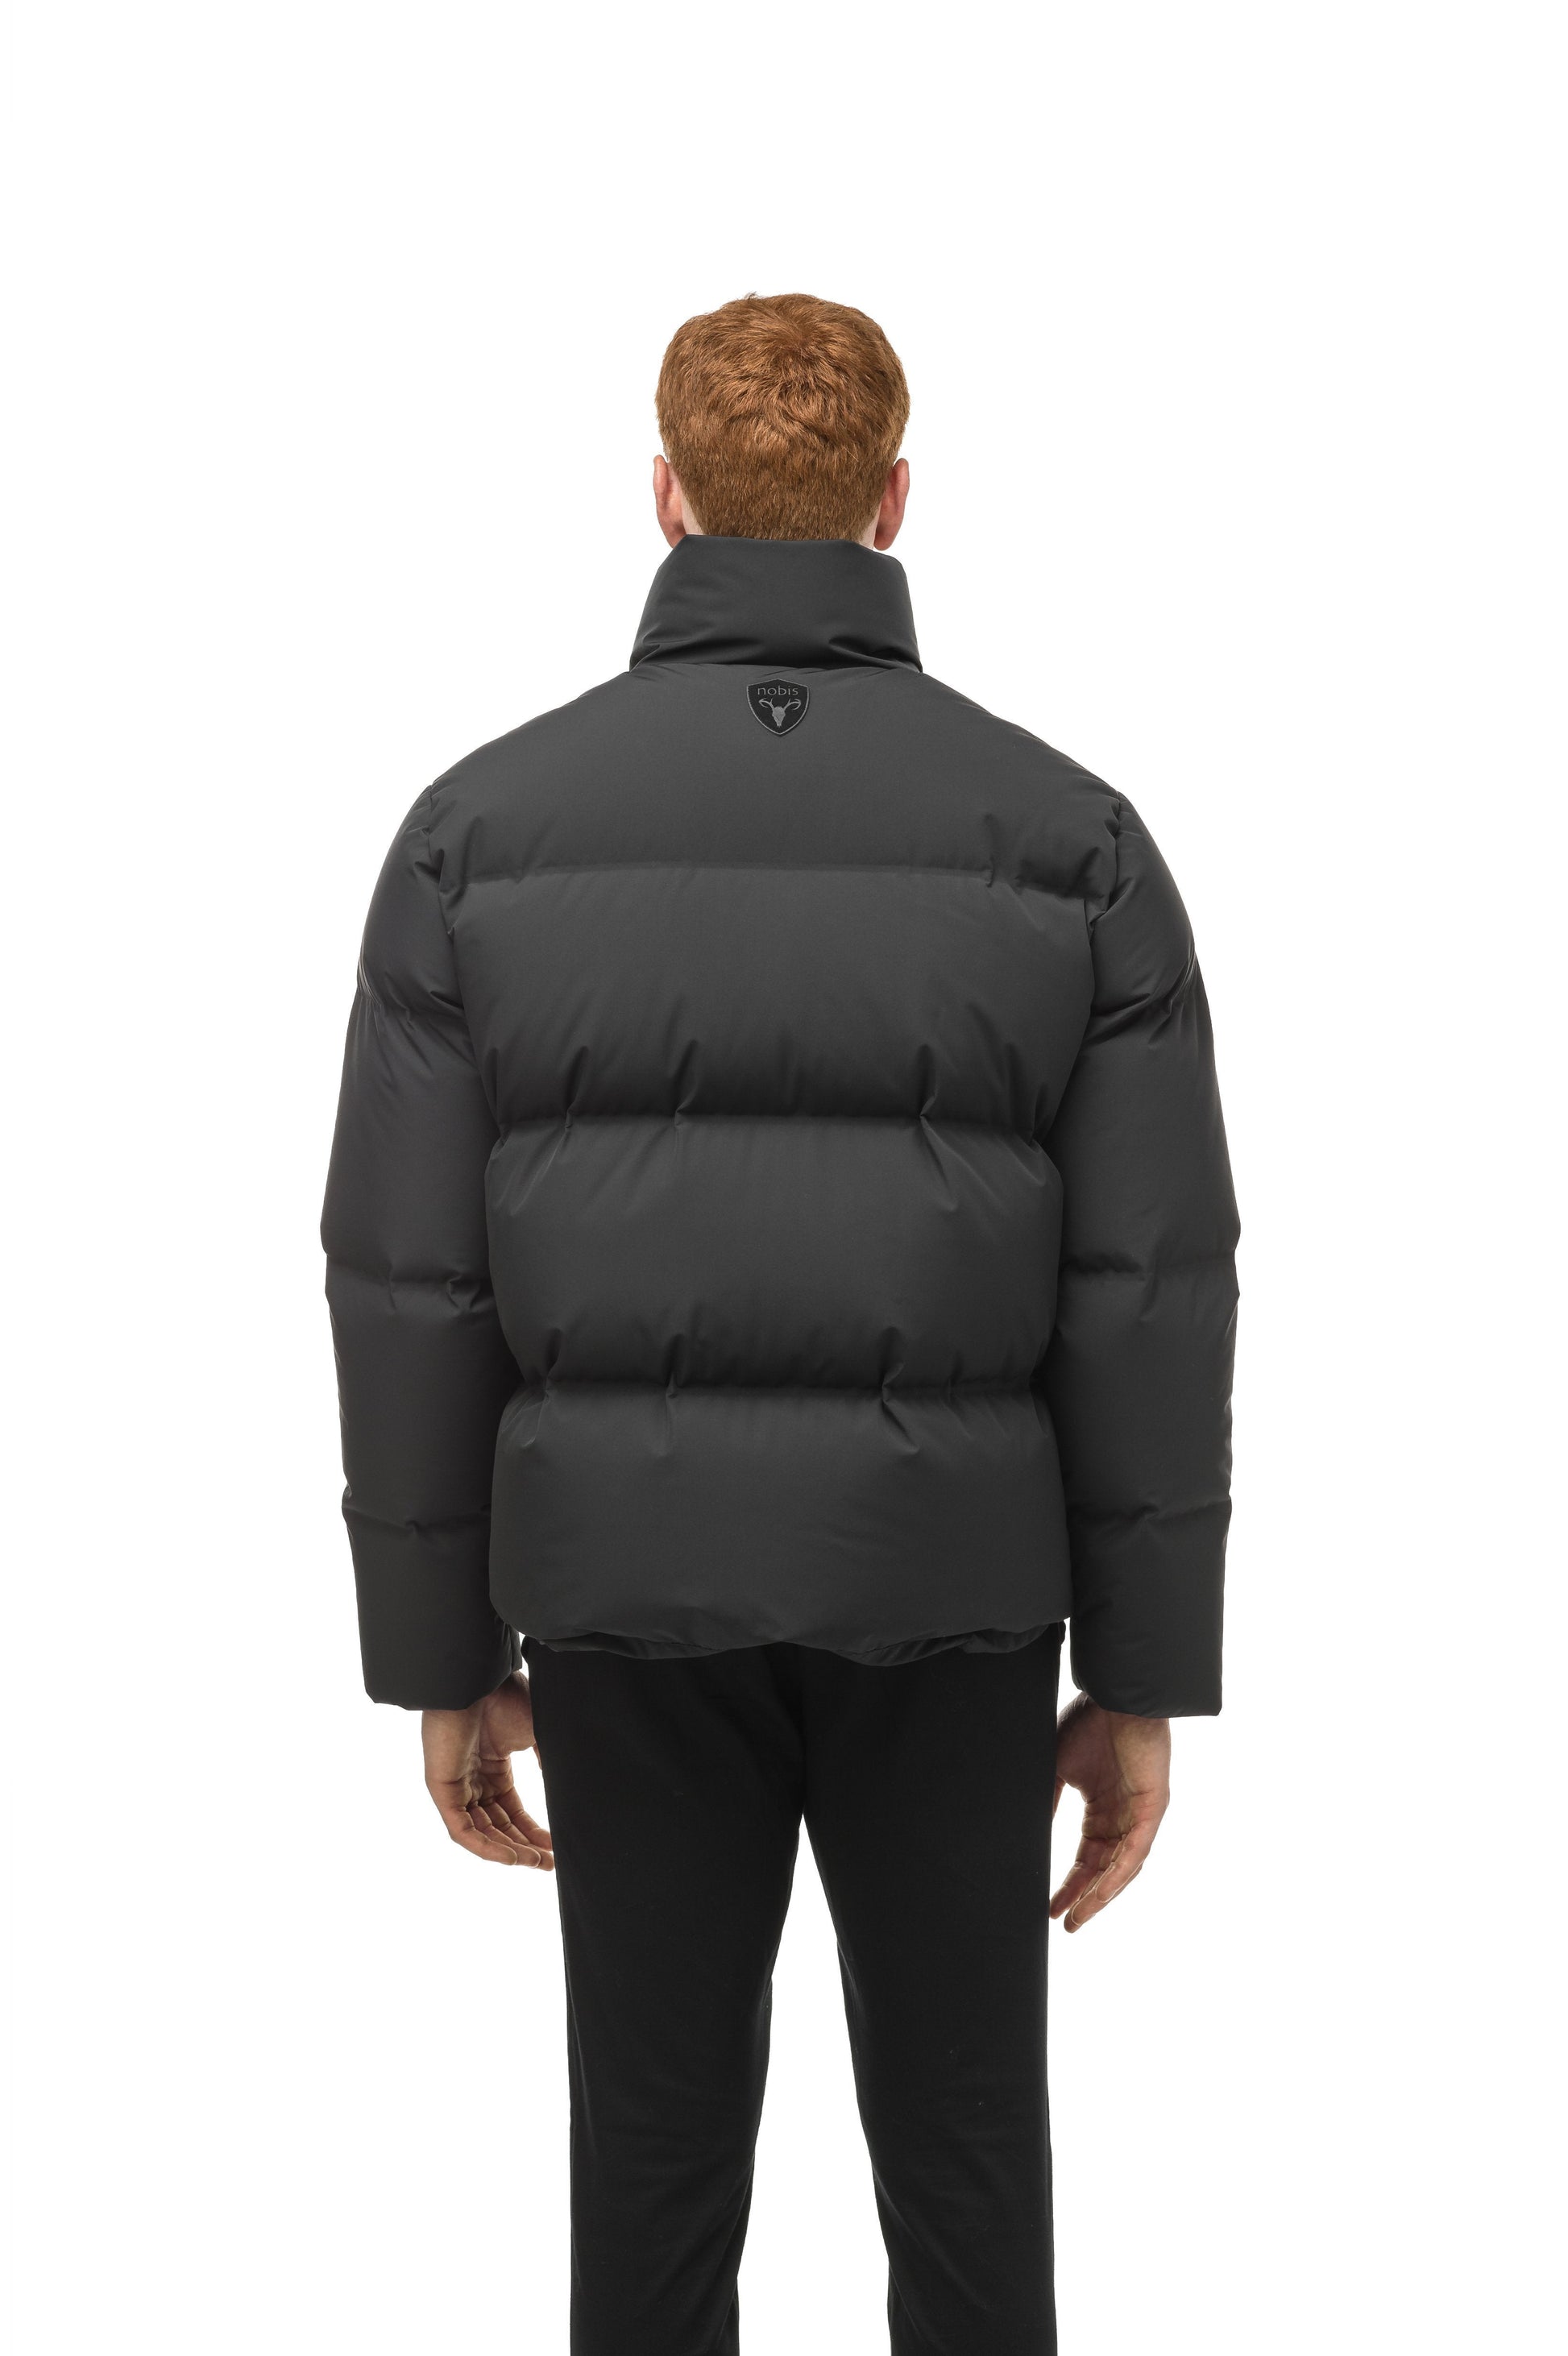 Men's puffer jacket with a minimalist modern design; featuring graphic details like oversized tonal branding, an exposed zipper, and seamless puffer channels in Black